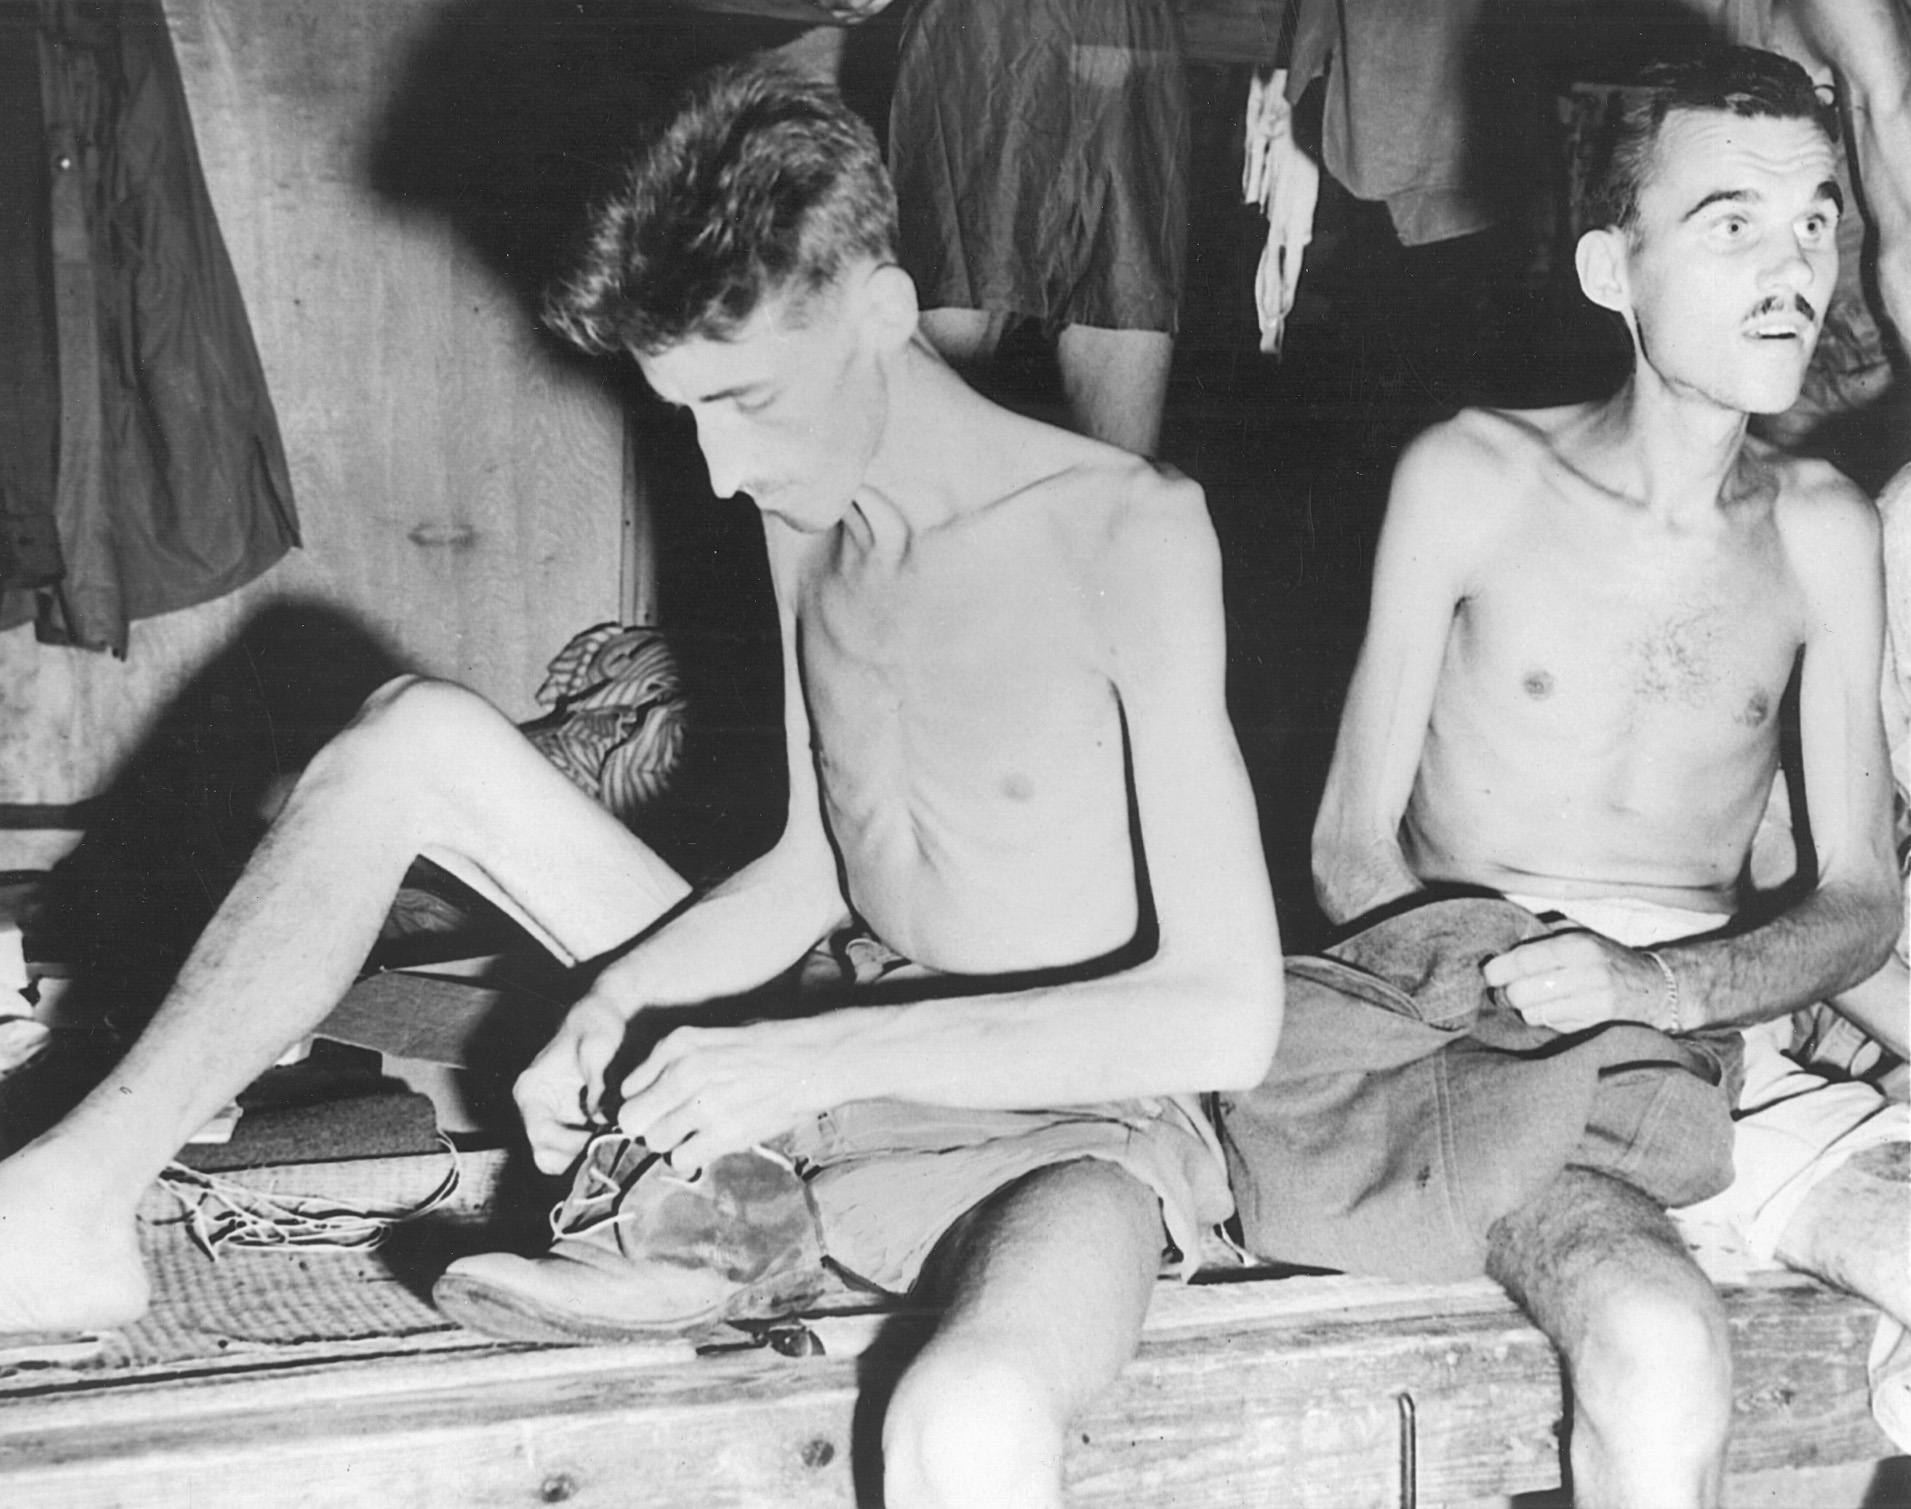 After receiving news of the Japanese surrender, emaciated Allied prisoners prepare to vacate their camp in Yokohama, Japan.